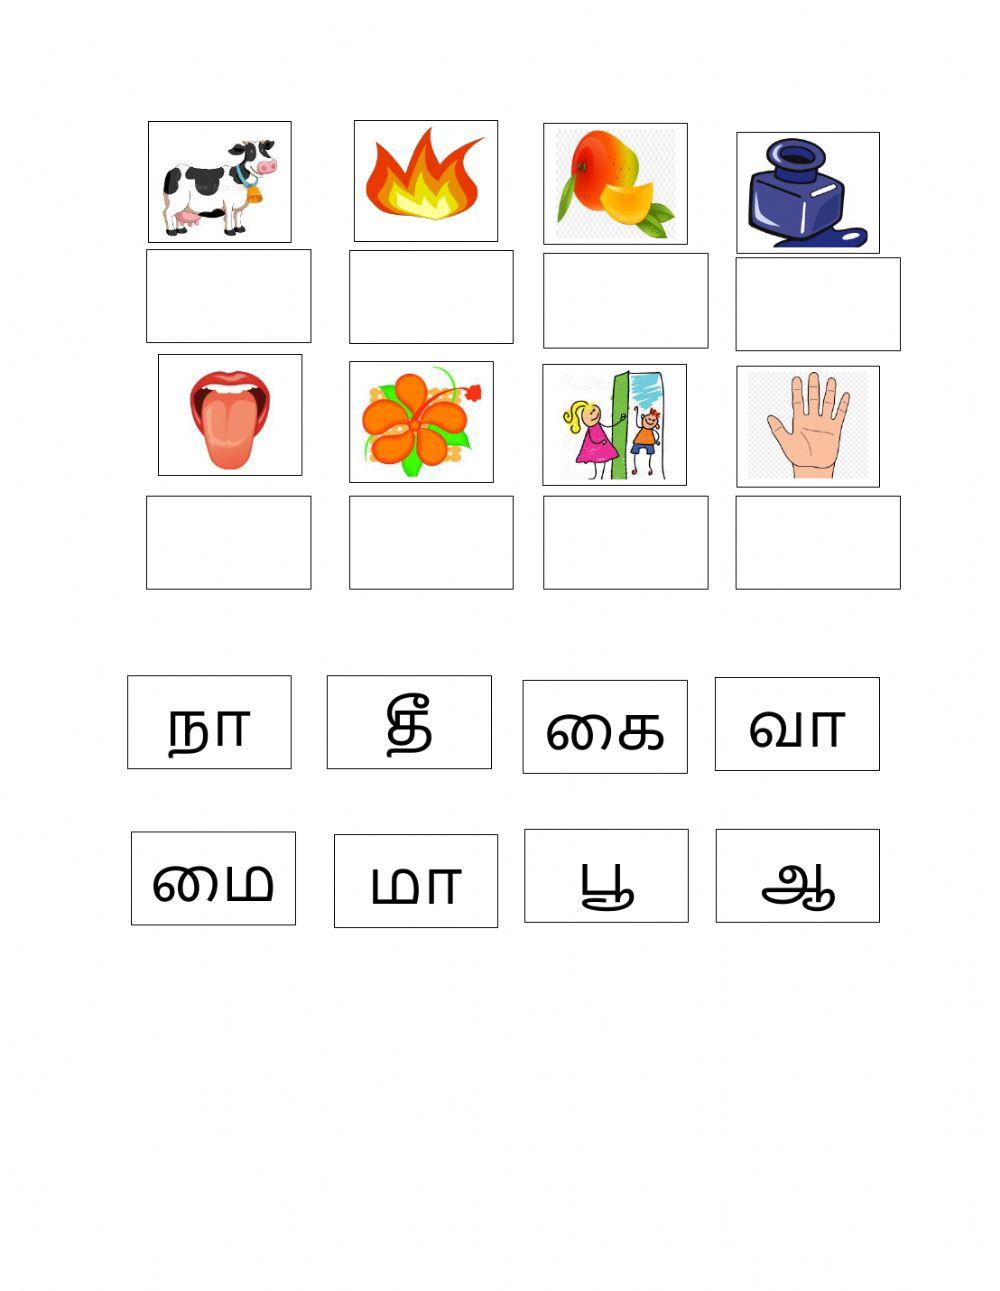 Tamil one letter word